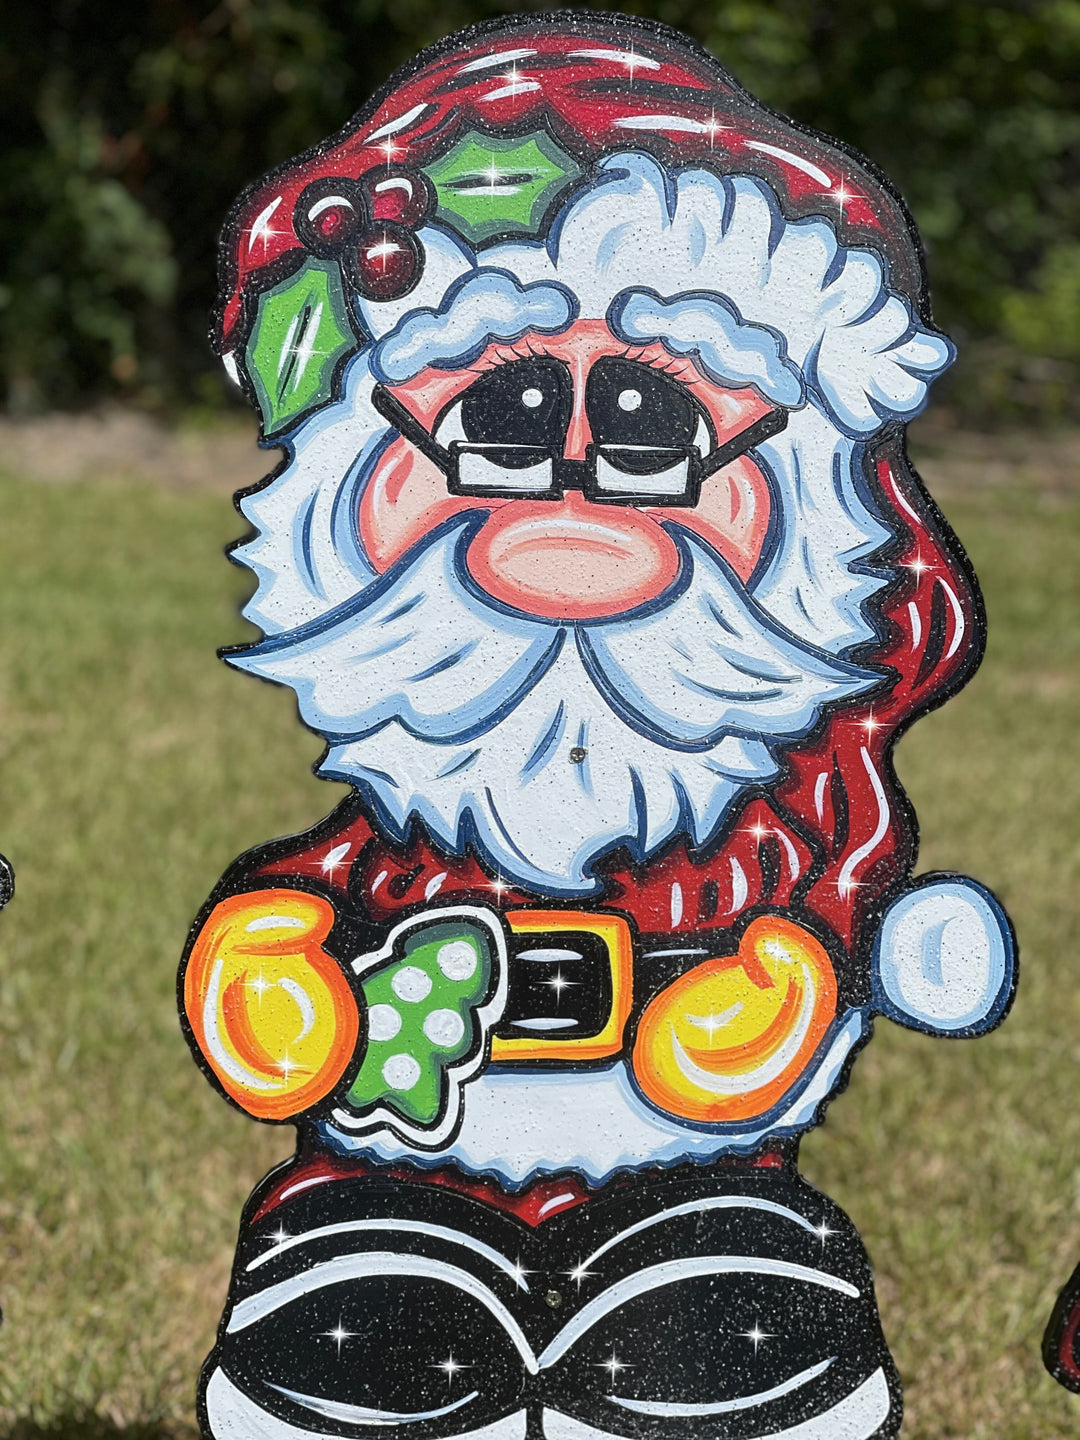 Christmas Santa clause with Mrs Clause yard art decor